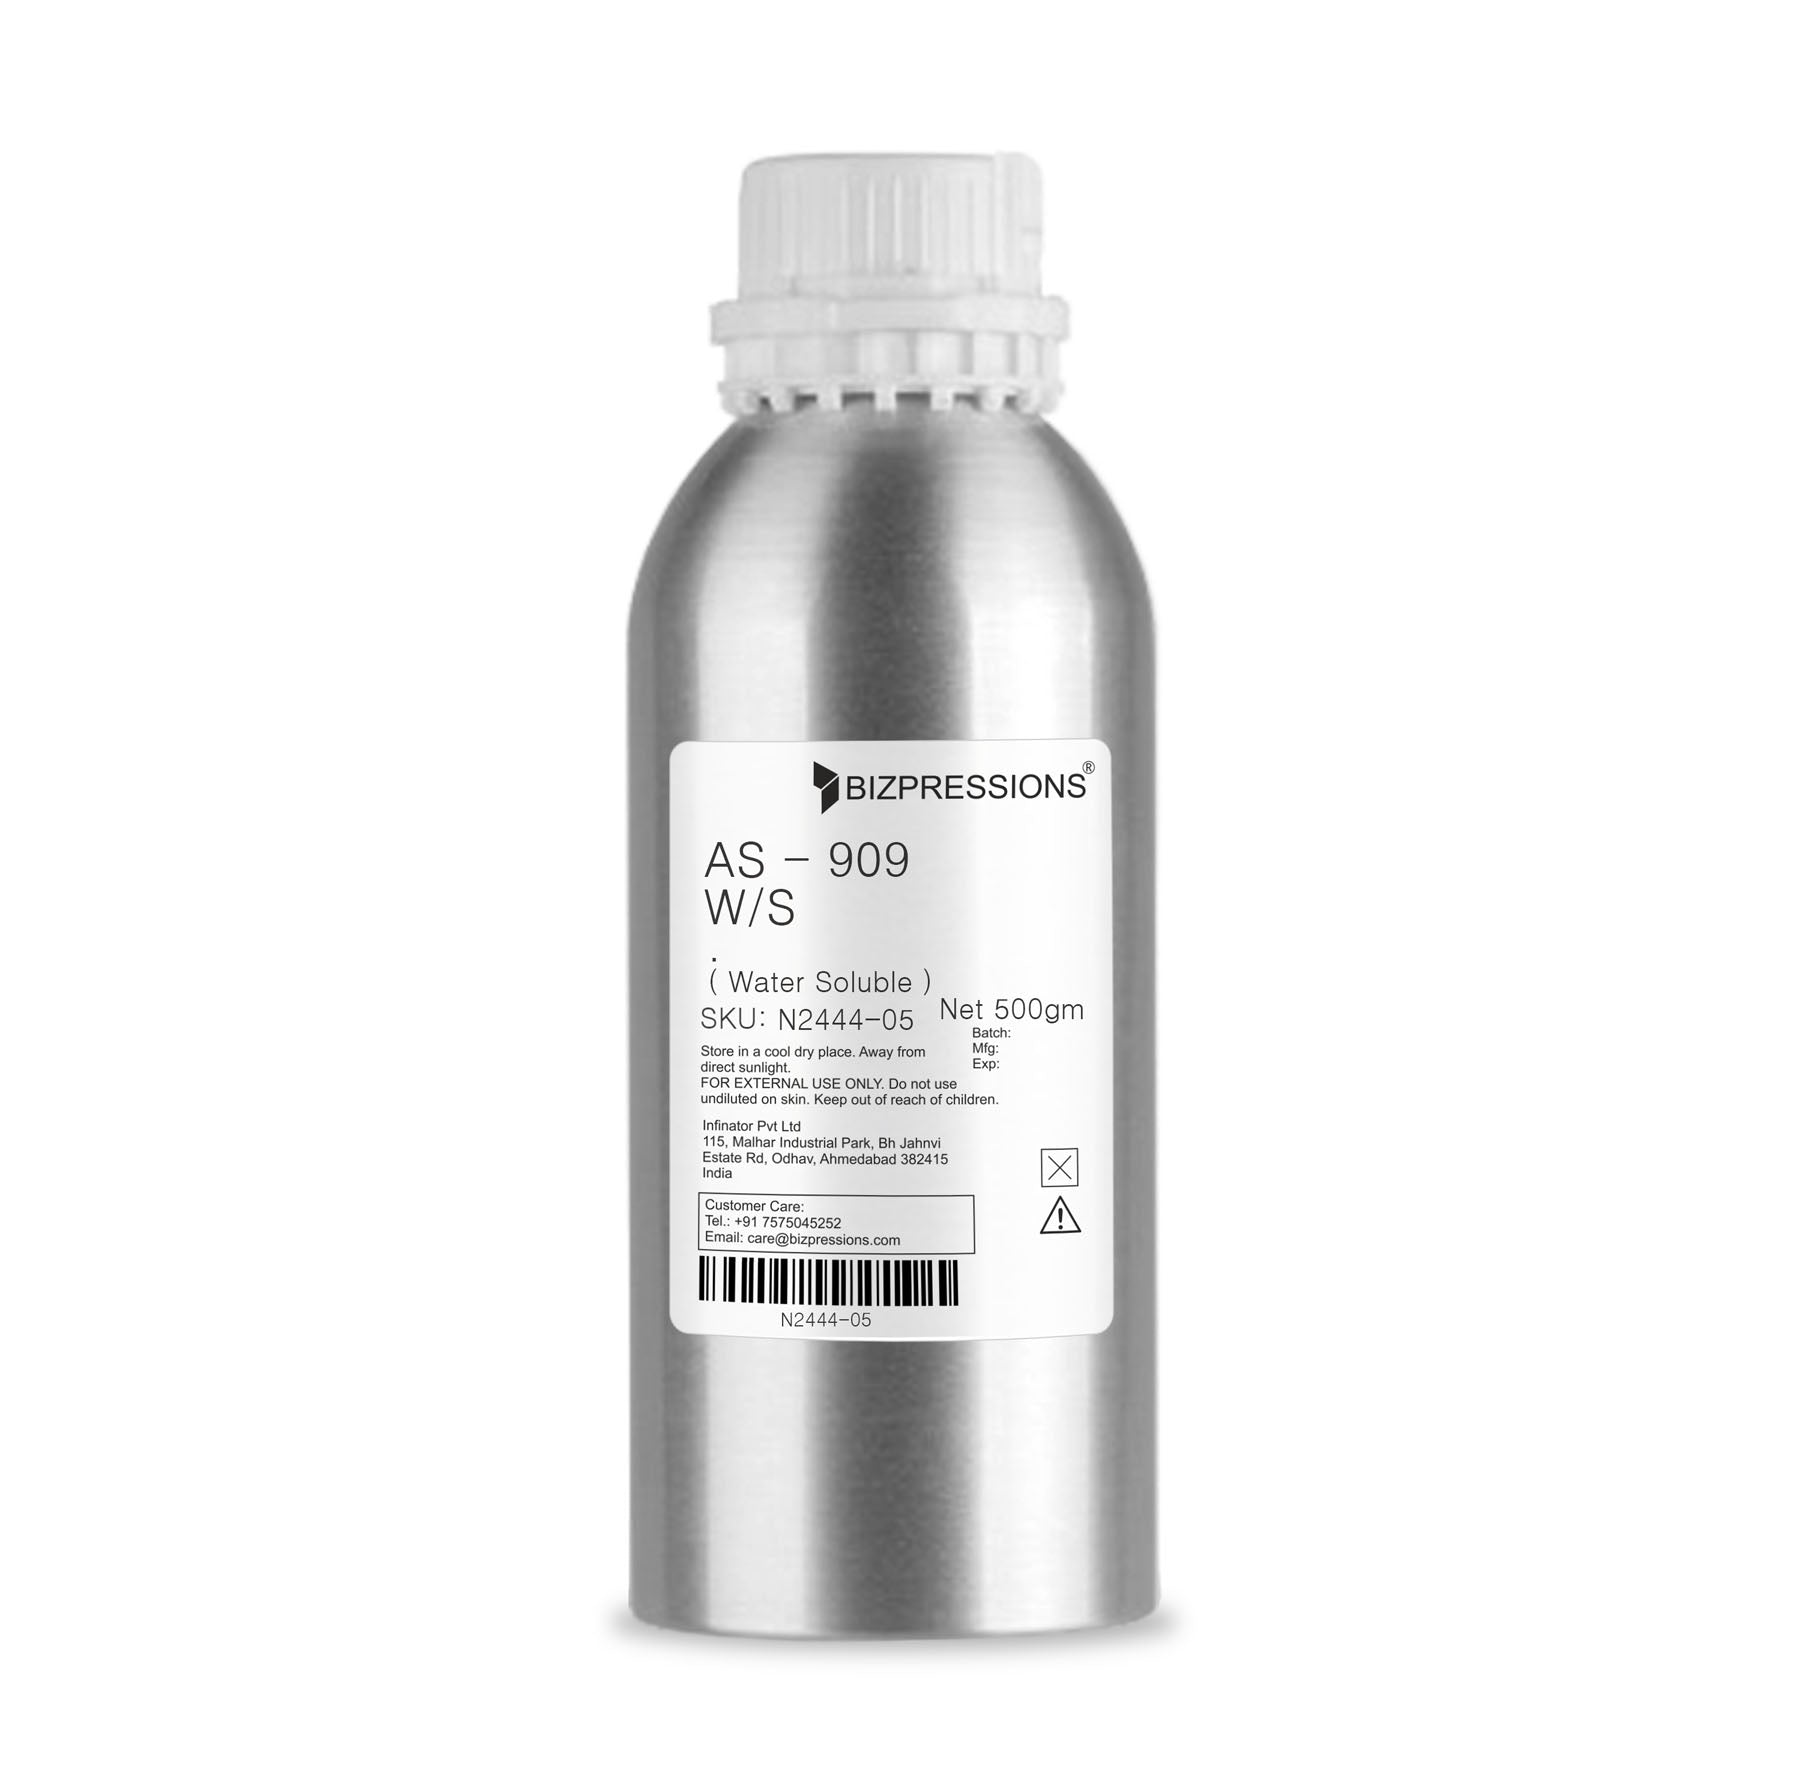 AS - 909 W/S - Fragrance ( Water Soluble ) - 500 gm